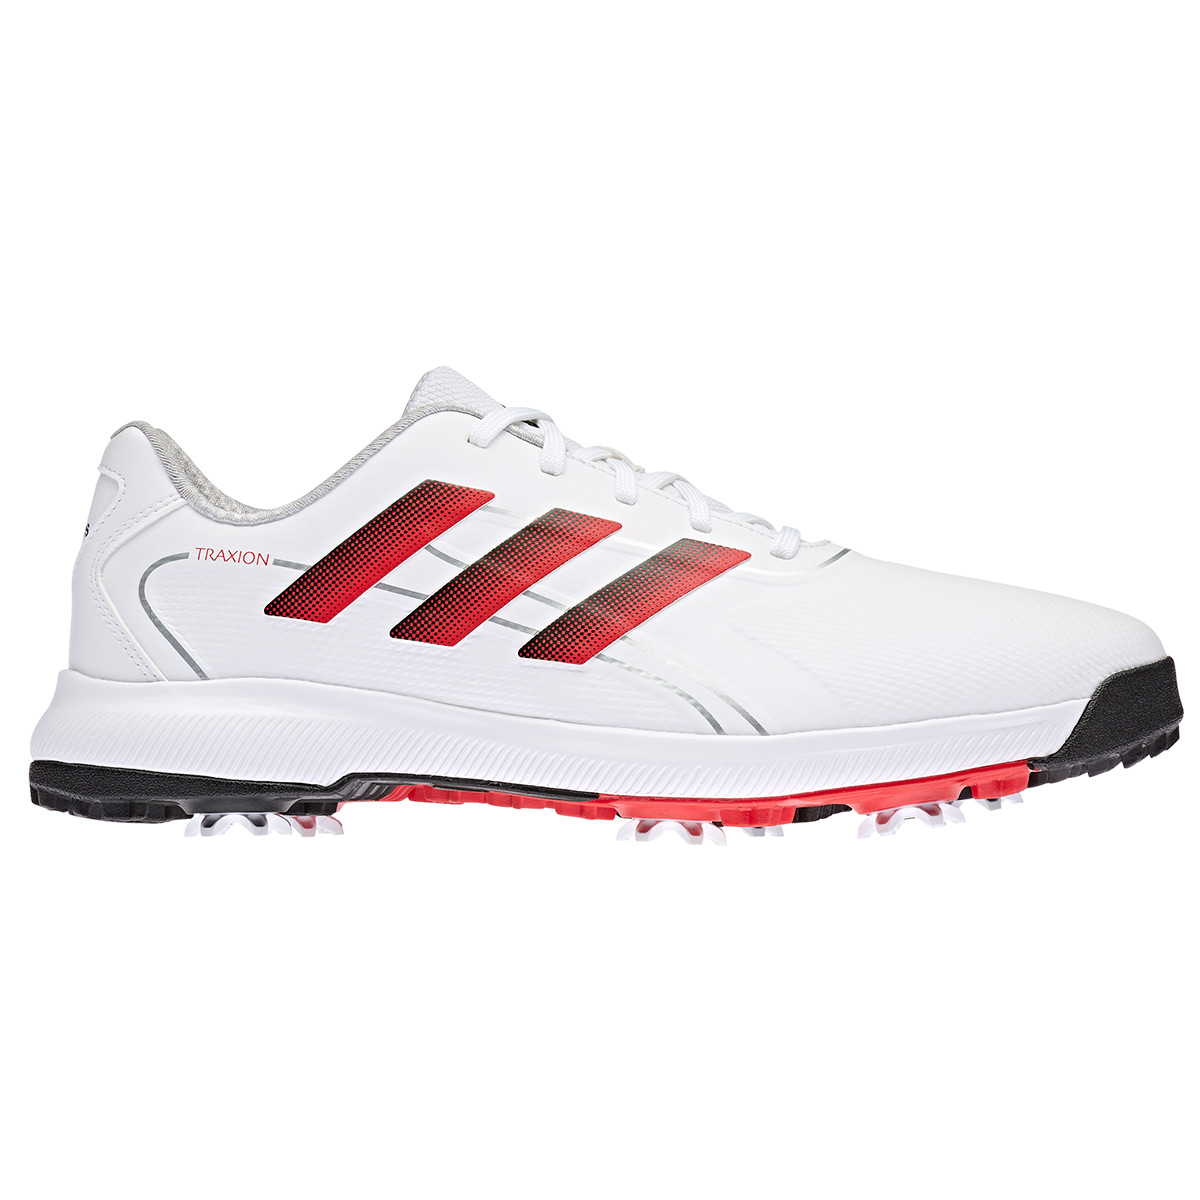 adidas Men's Traxion Lite Max Waterproof Spiked Golf Shoes from ...